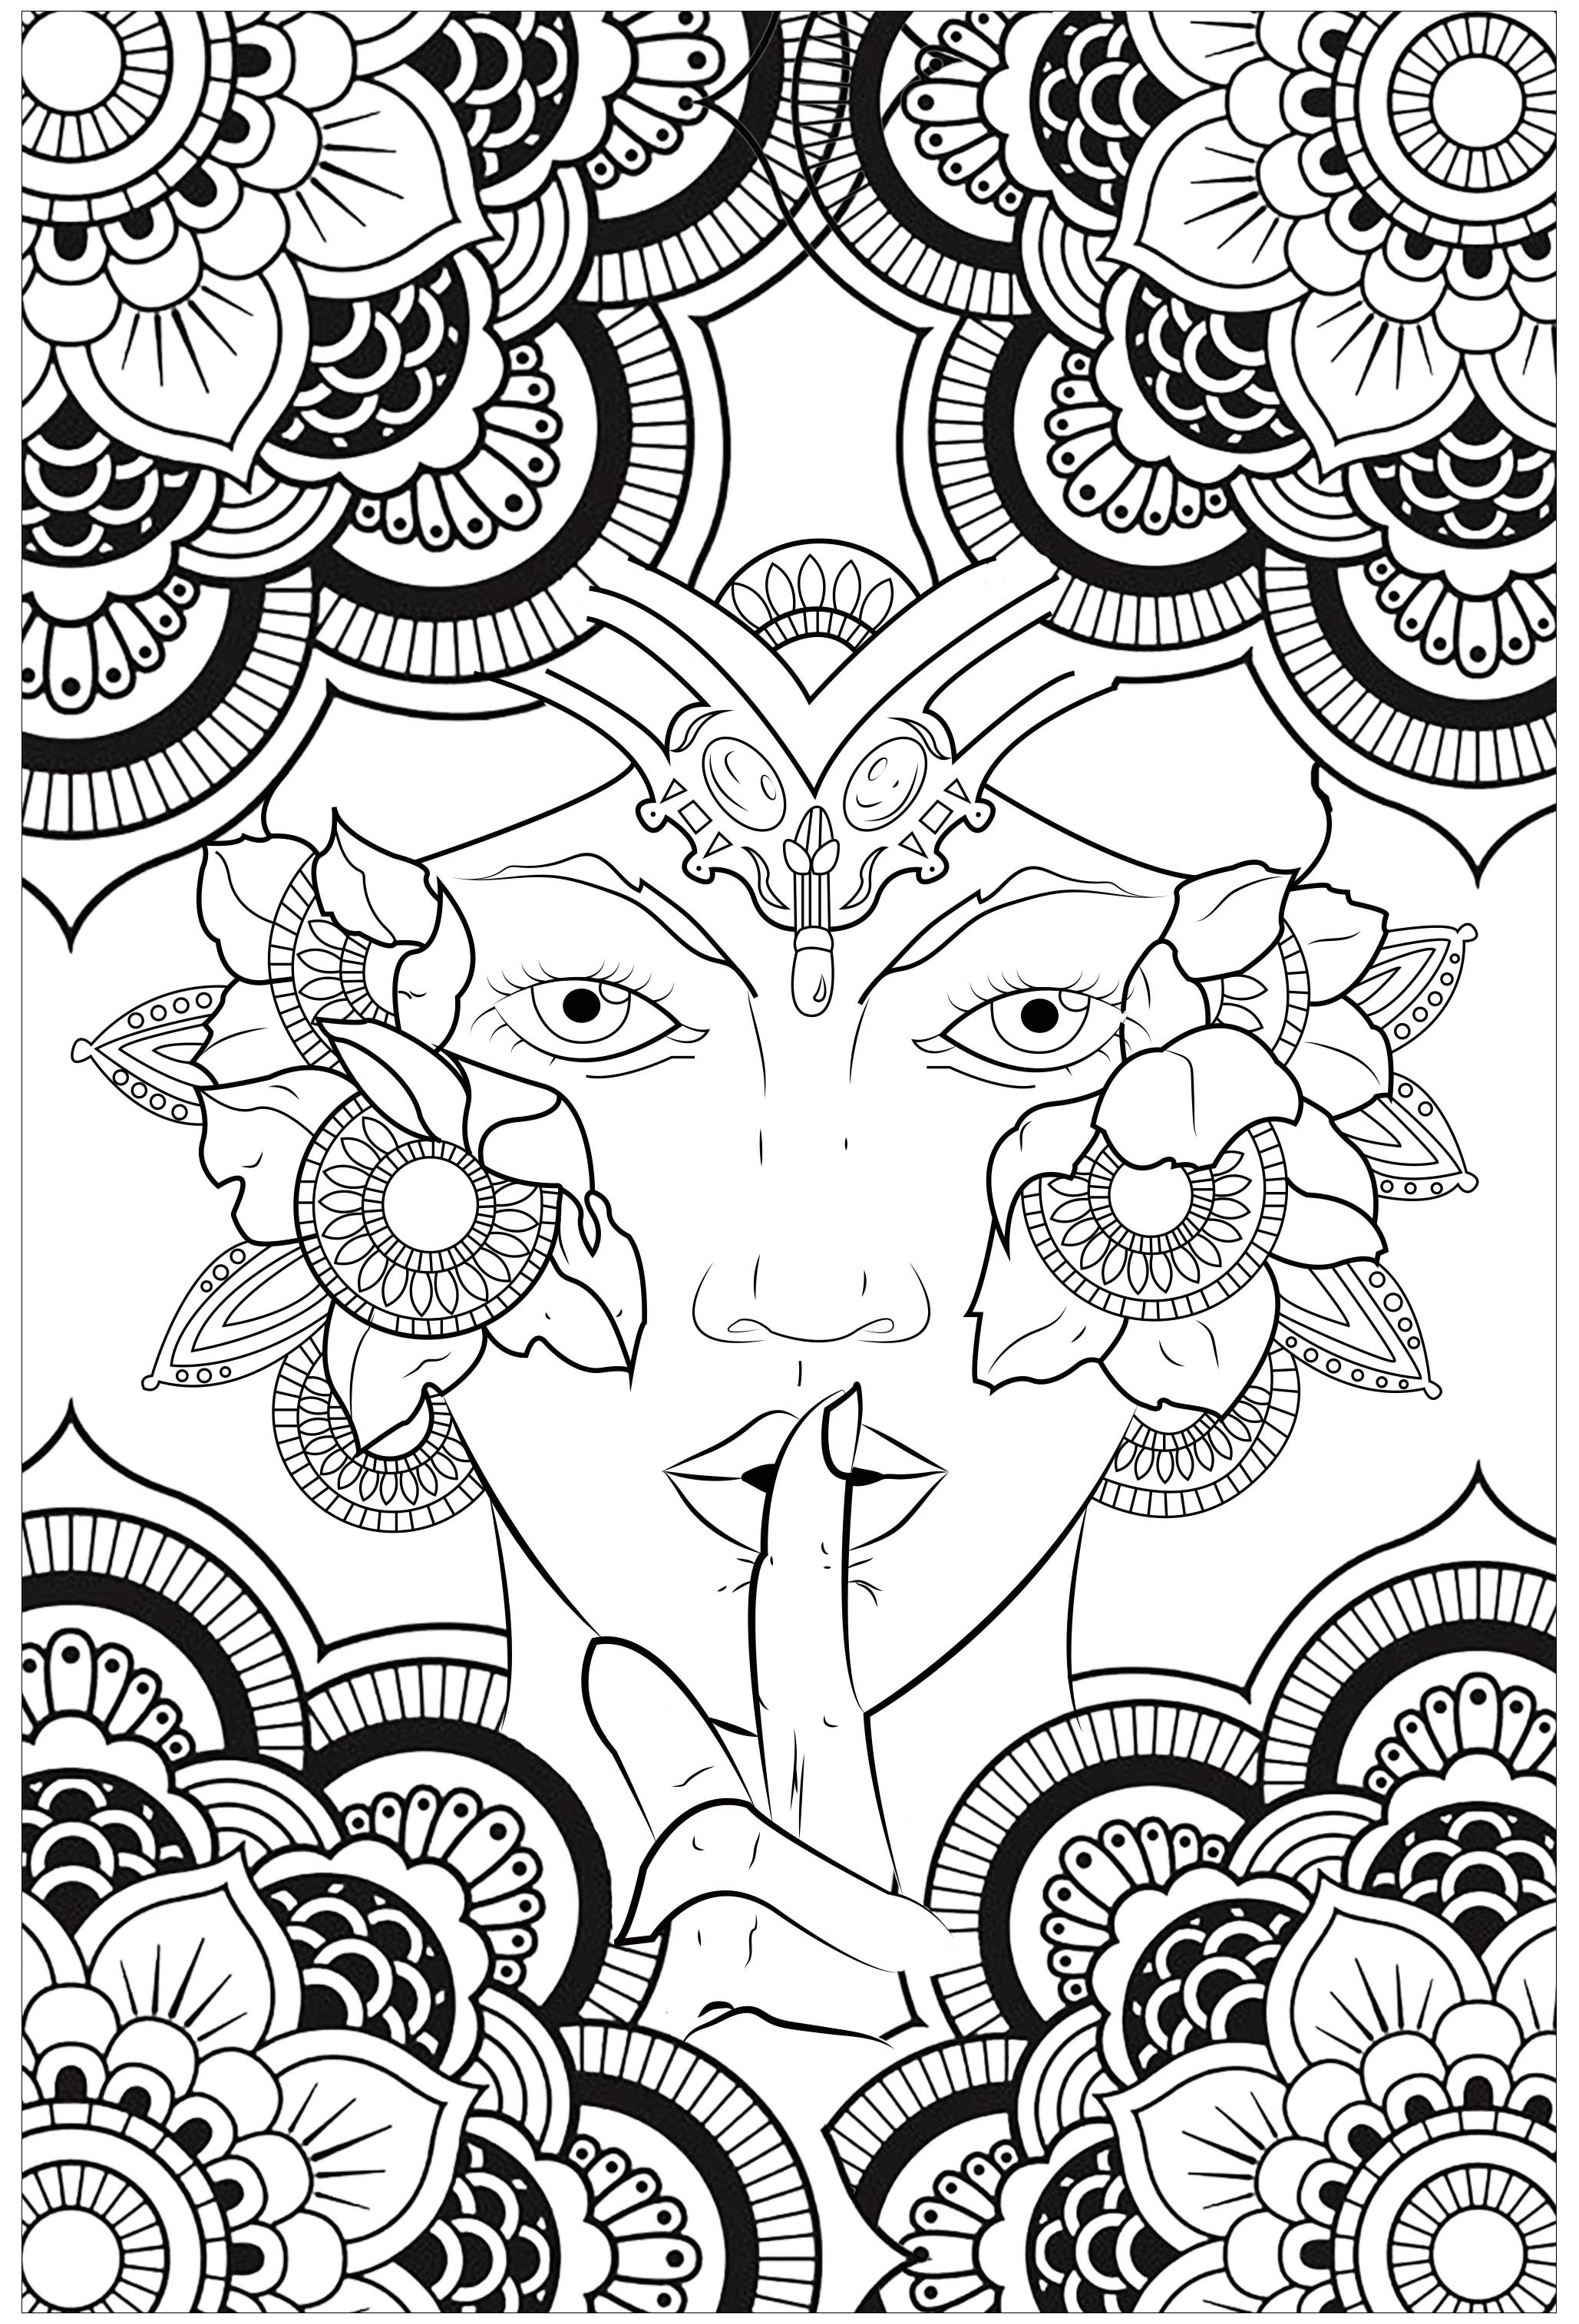 Silent Woman, with mandalas, Artist : Caillou